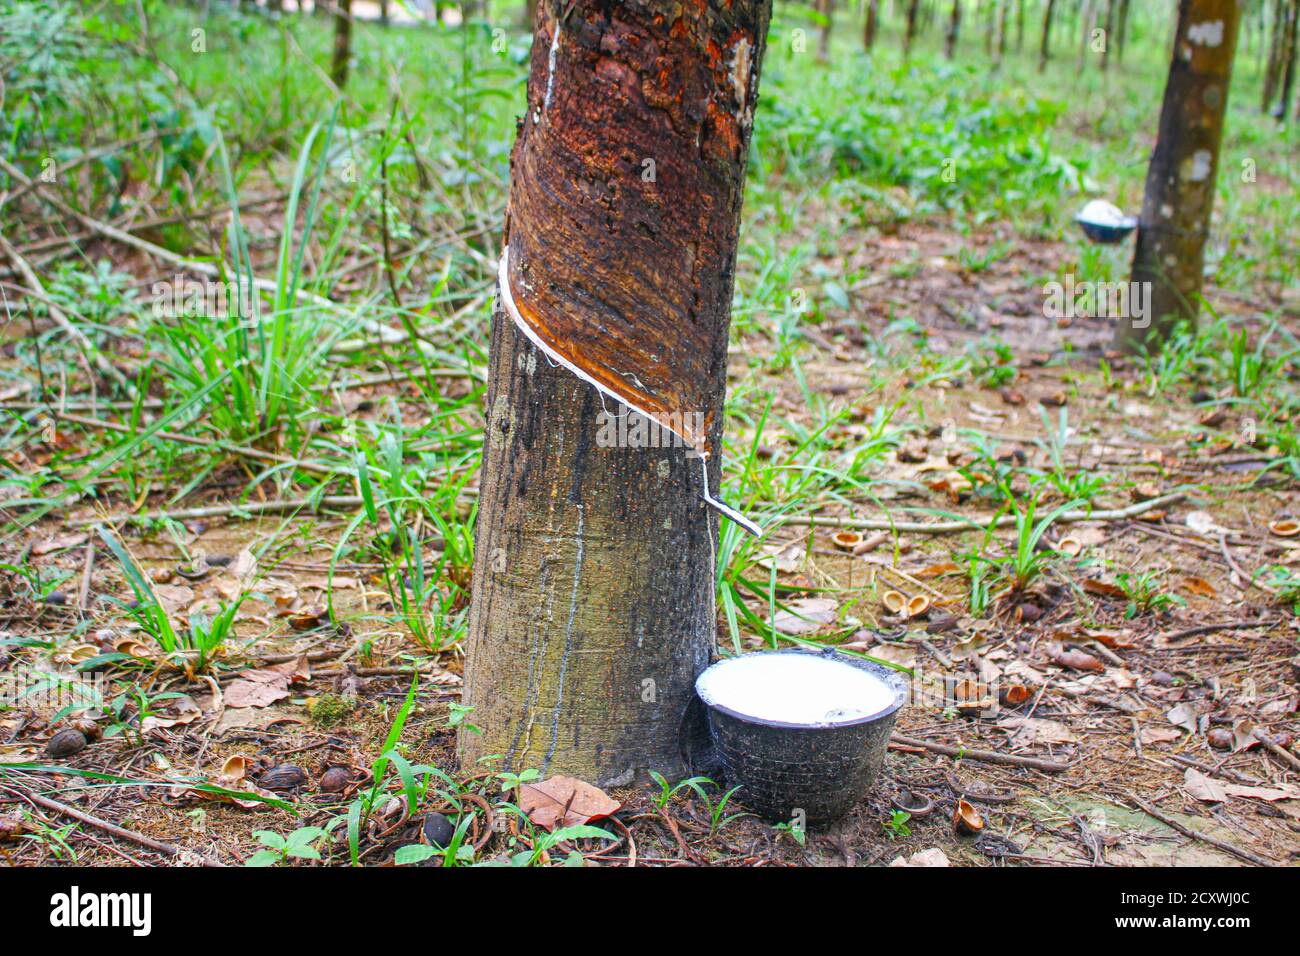 Vietnam rubber tree,Tapping latex rubber,latex extracted from rubber tree source of natural in Vietnam asia Stock Photo